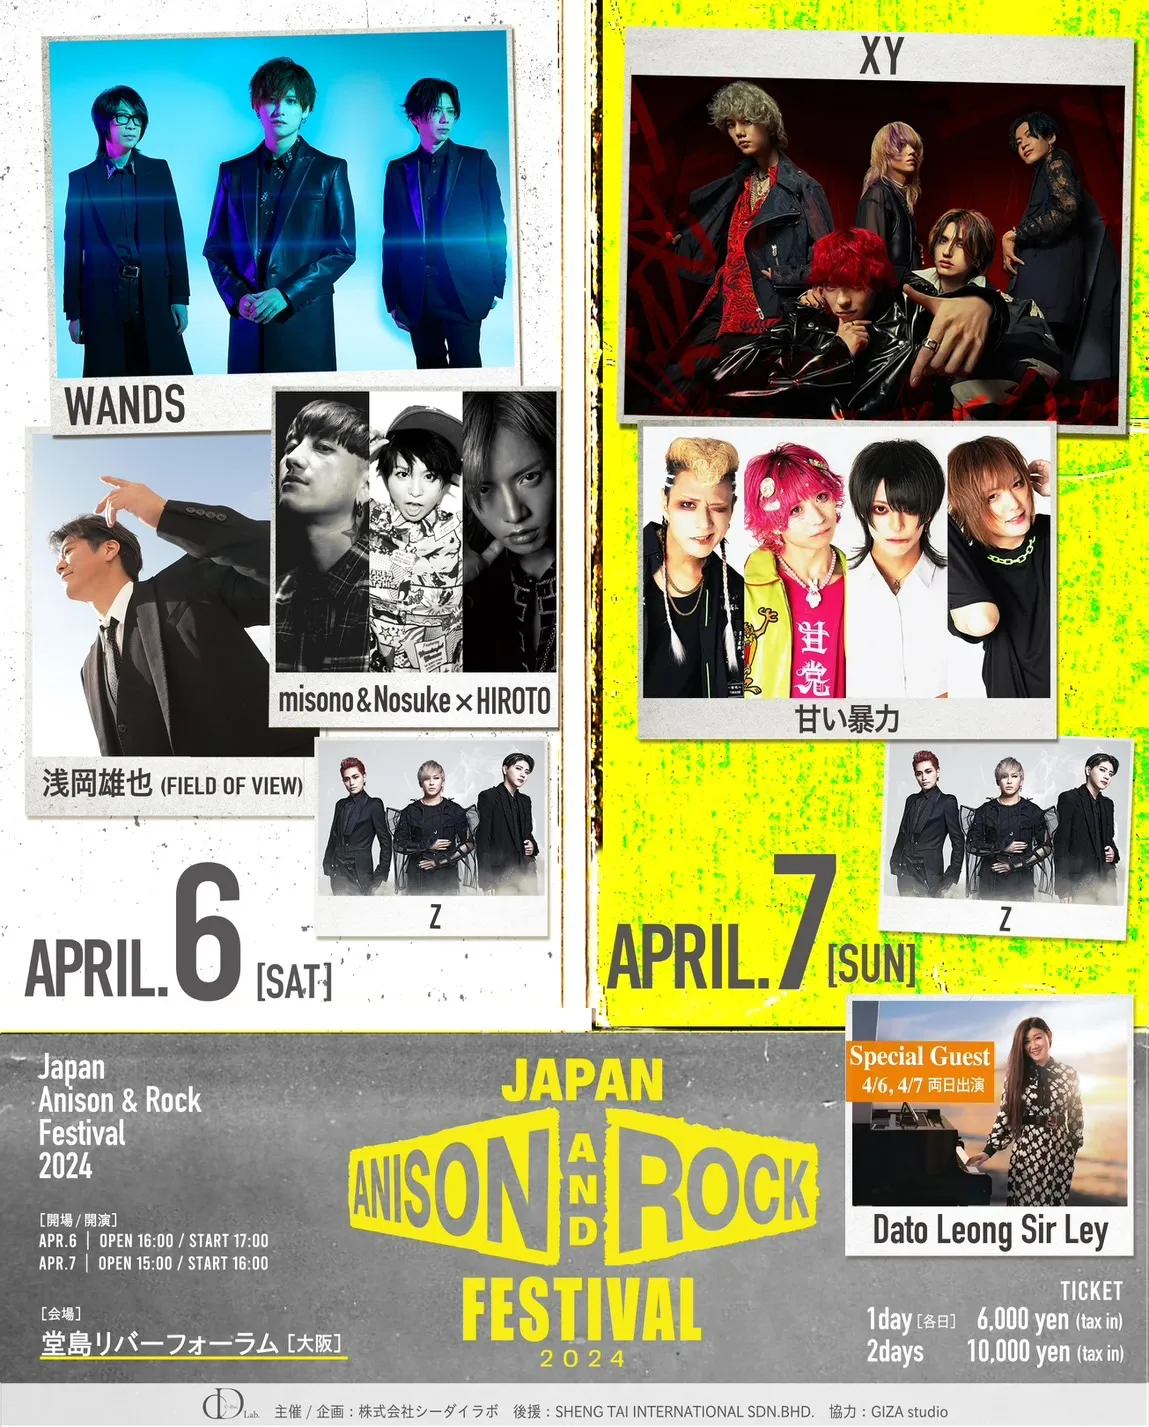 JAPAN ANISON AND ROCK FESTIVAL 2024